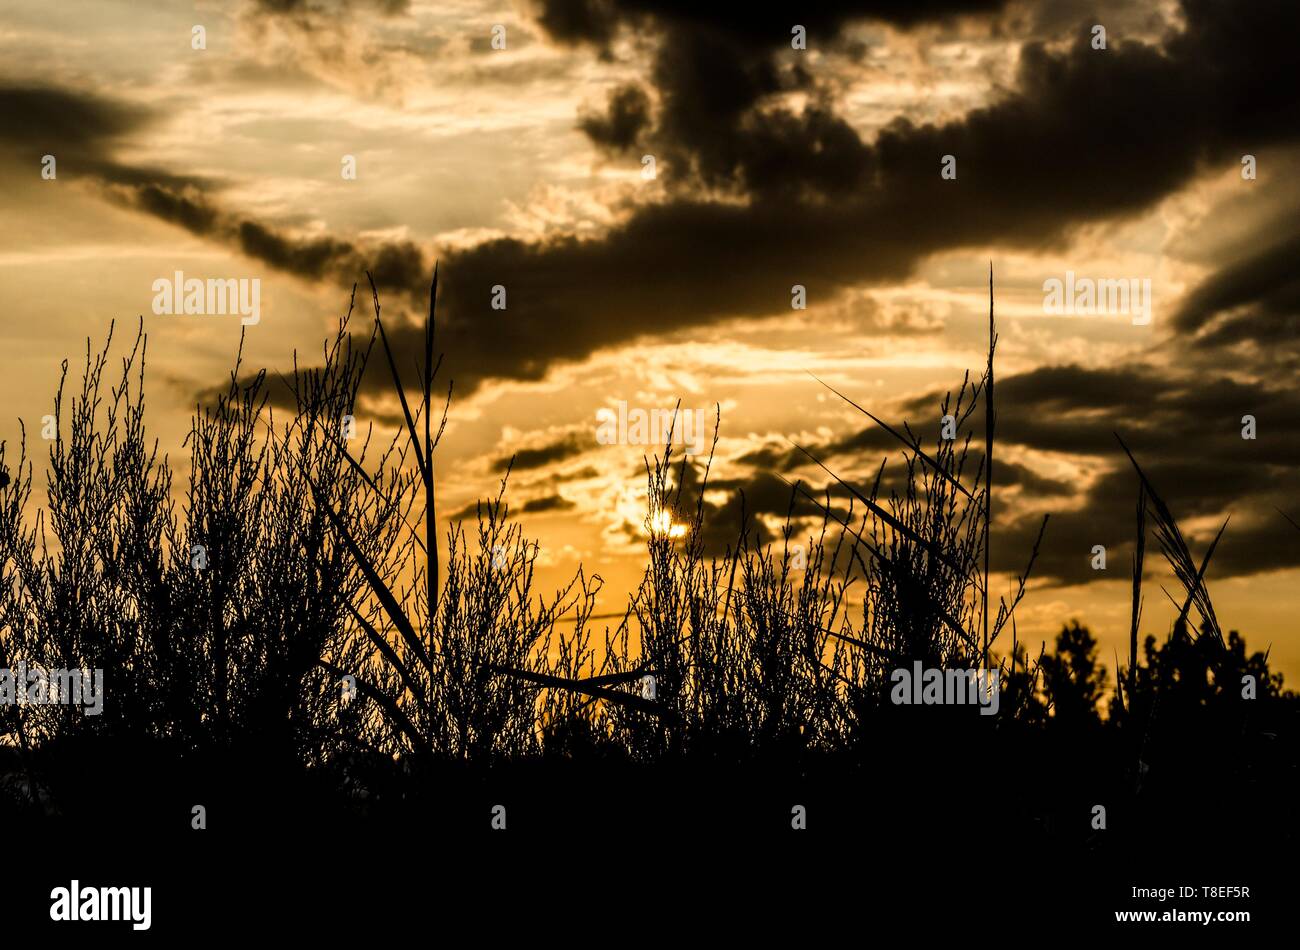 Silhouette of Dried Plants